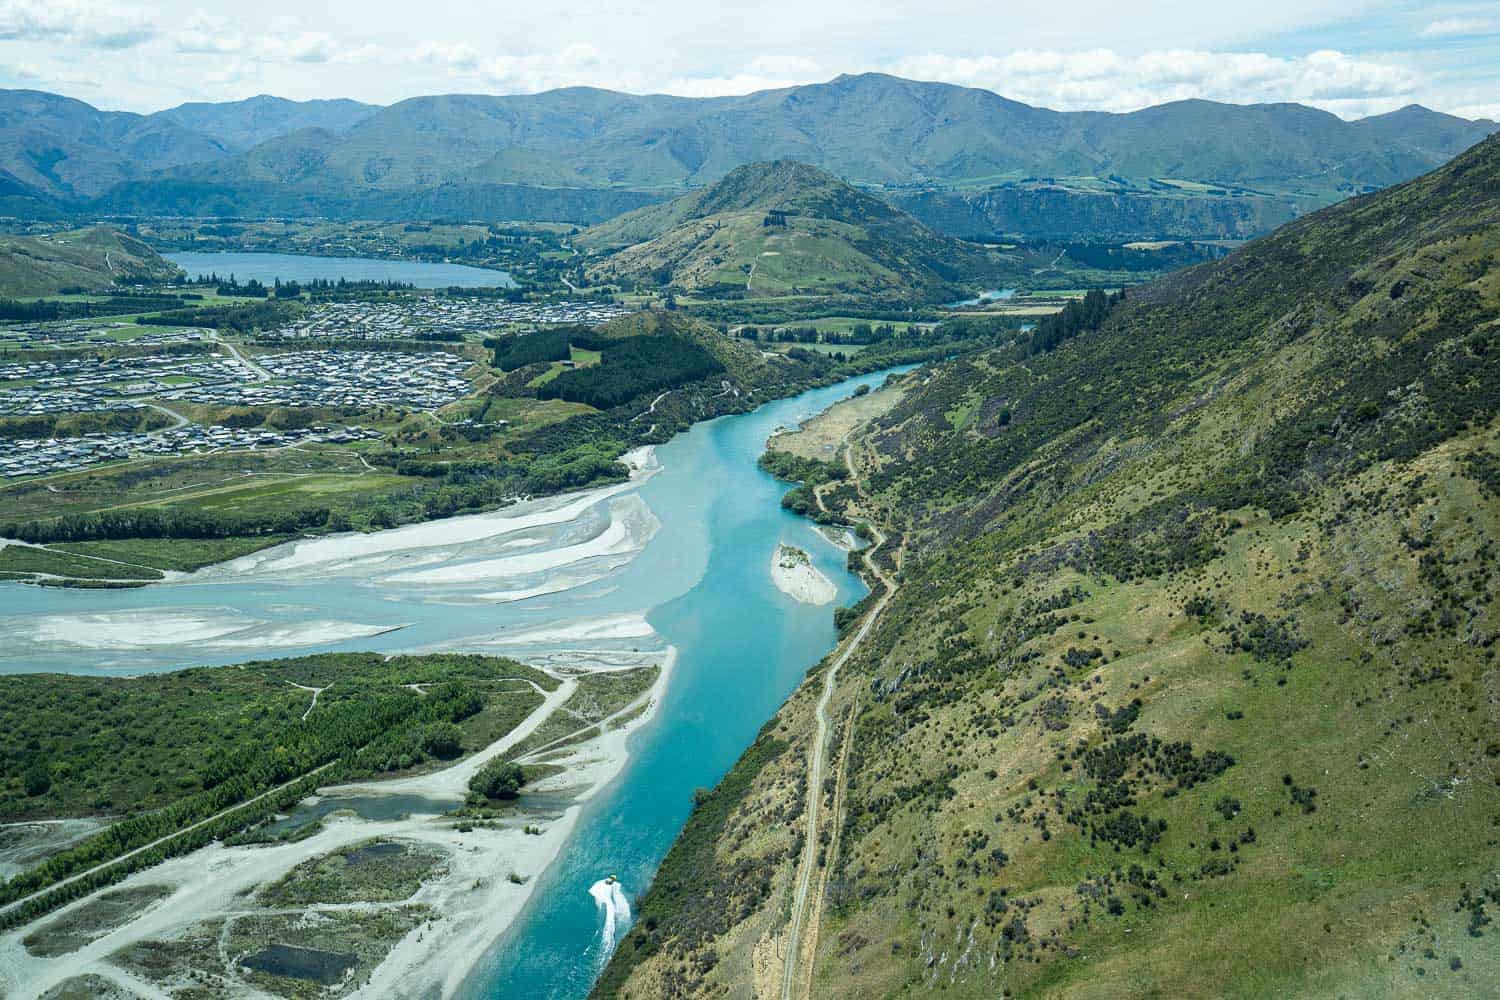 View from above of Kawarau River near Queenstown